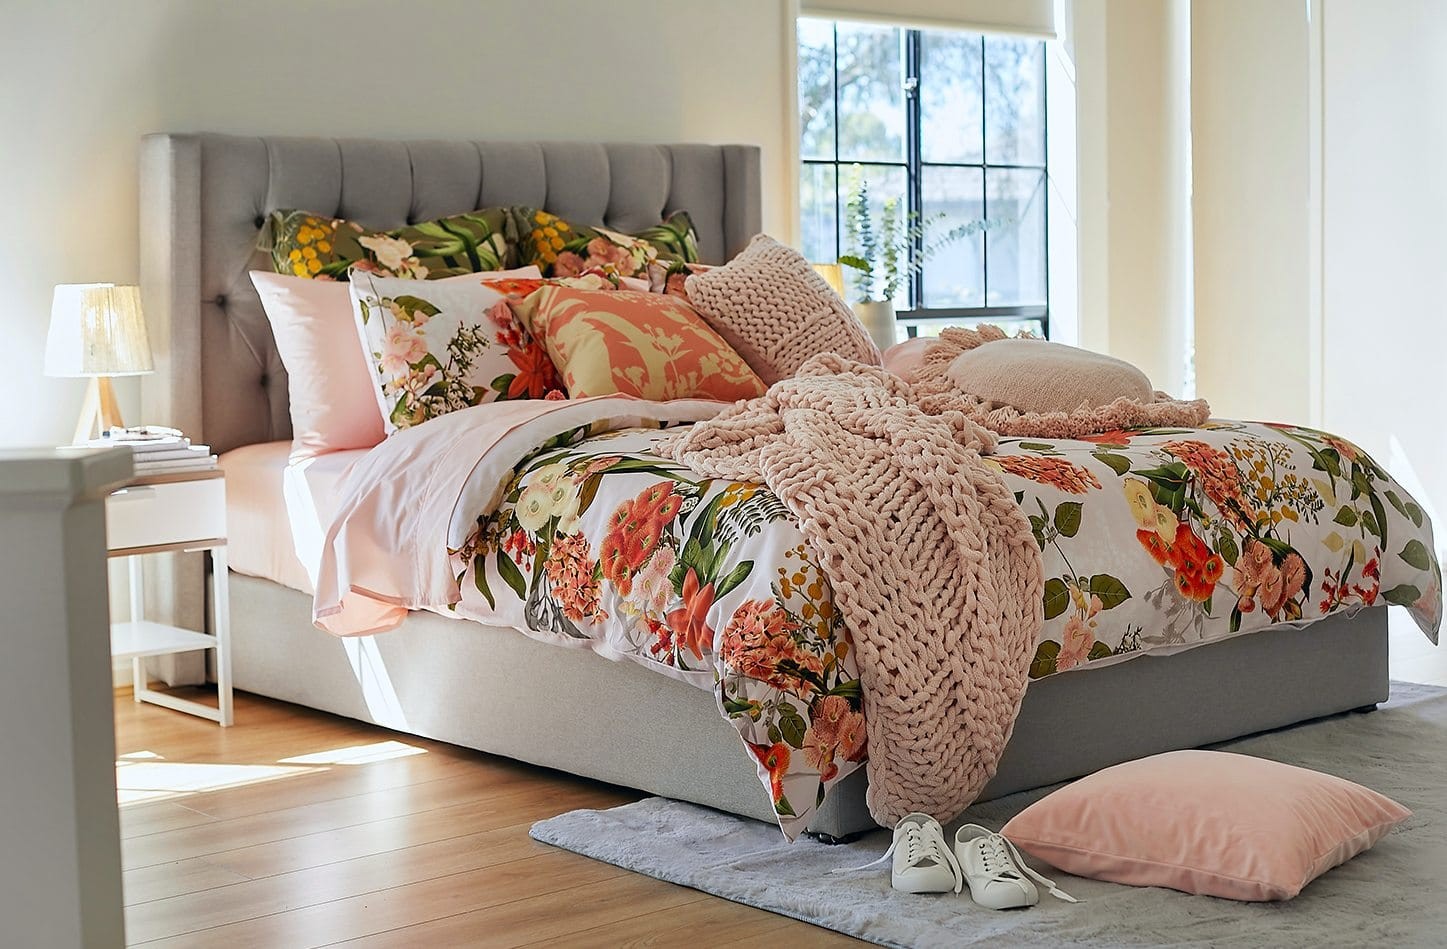 desert tones interior design bedrom with floral quilt cover set and blush sheets